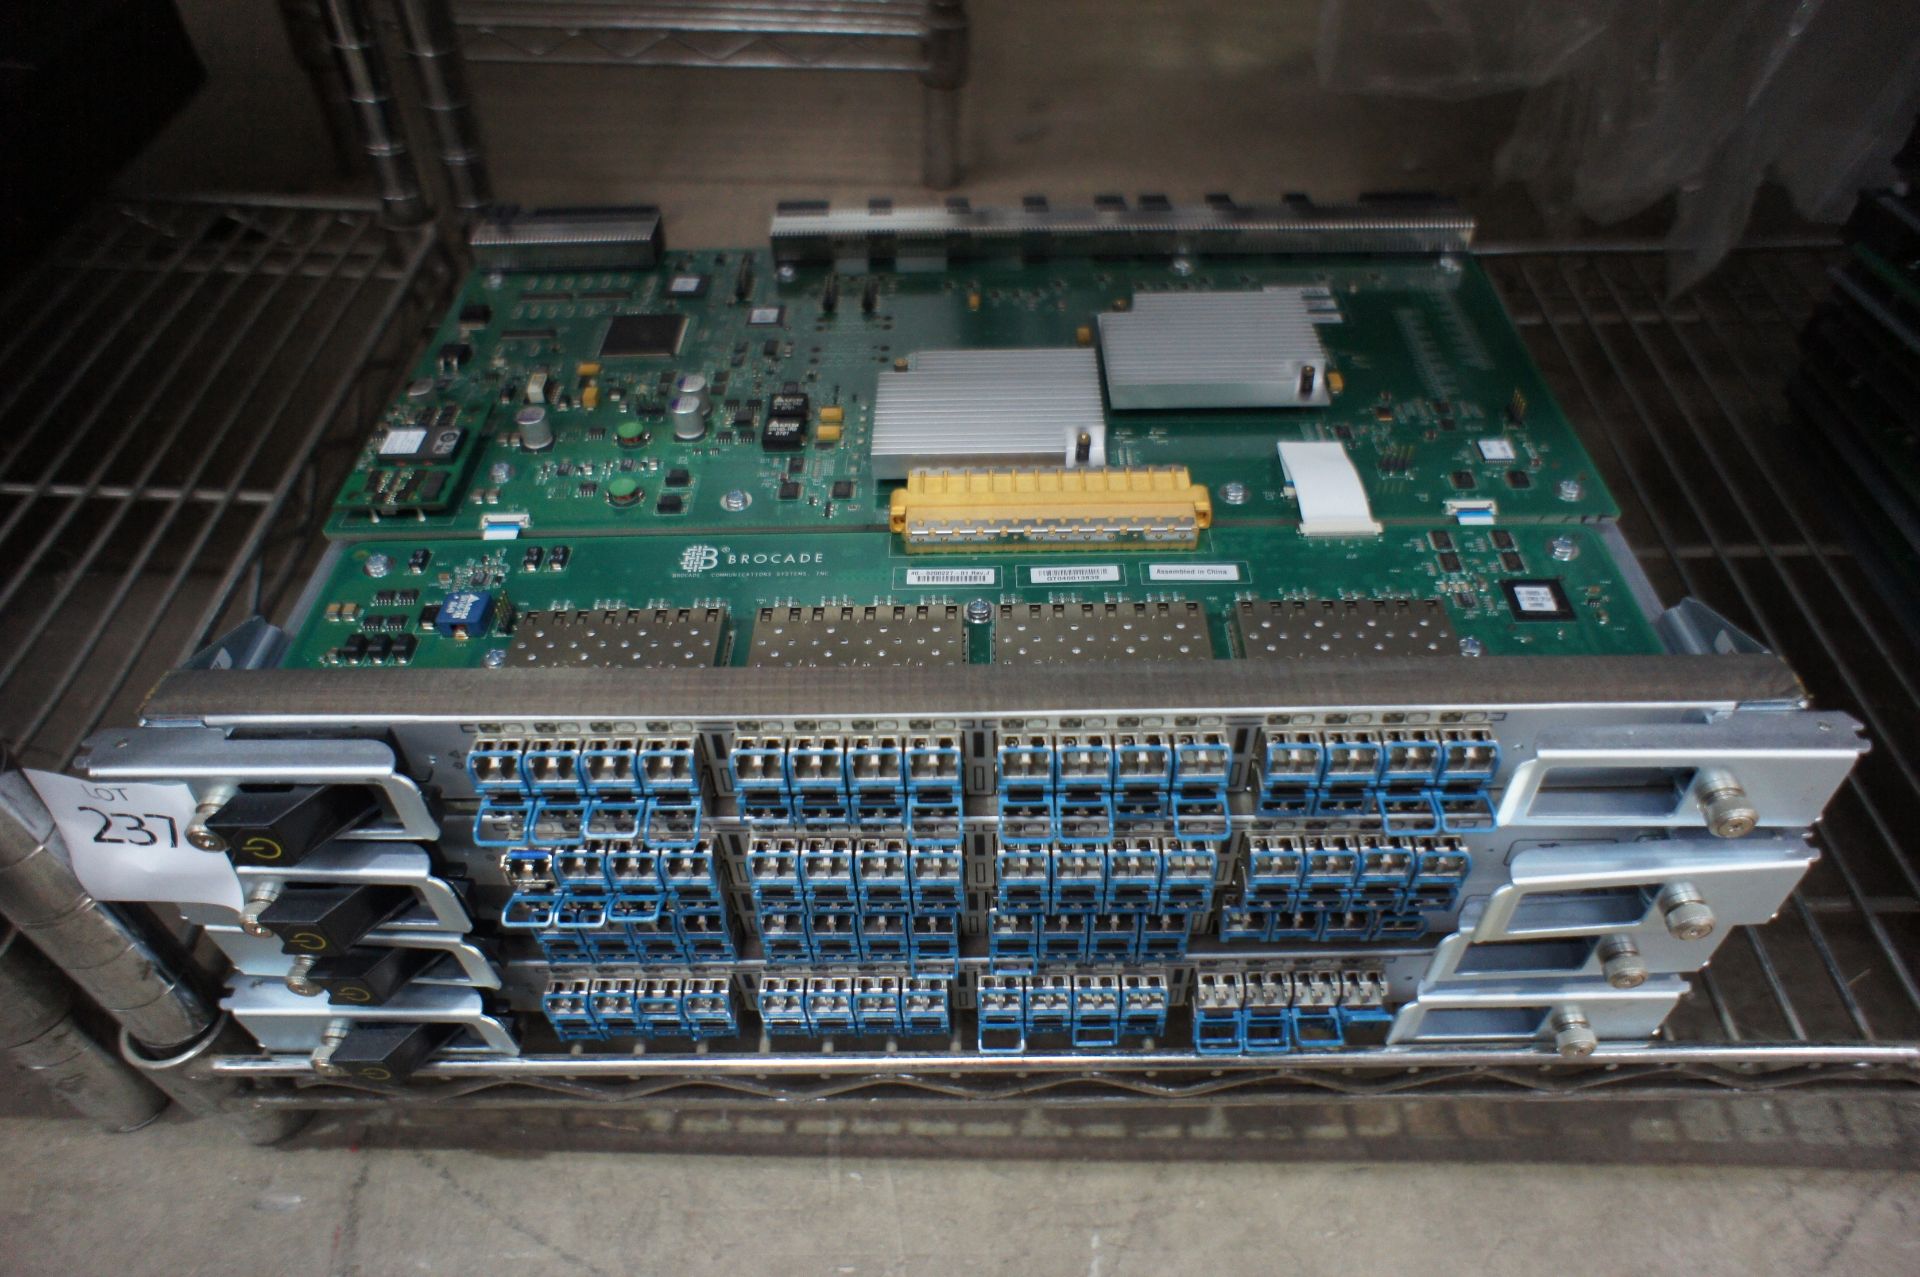 3 x Cisco DS-CAC-6000W Power Supplies (unboxed), 1 x Brocade FastIron FCX624-E-ADV switch, FCX, 3 - Image 34 of 34